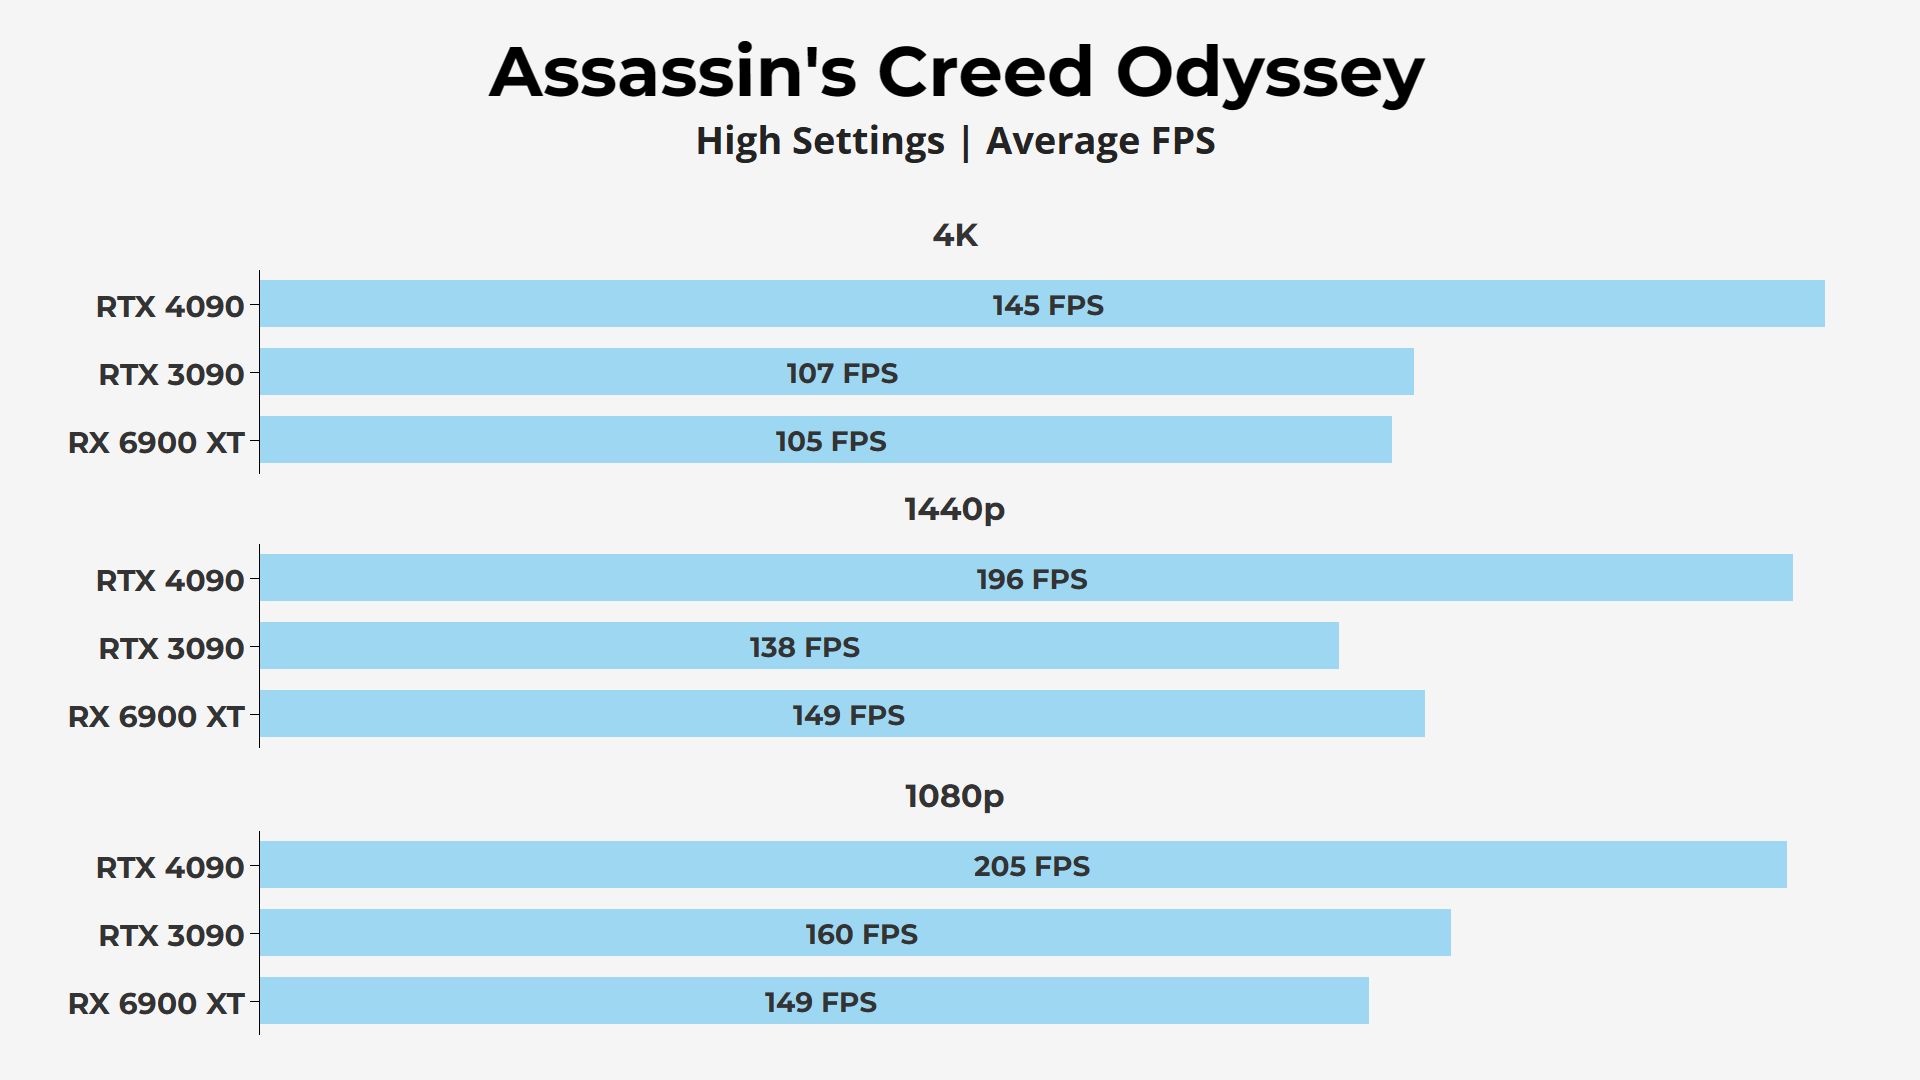 Assassin's Creed Odyssey RTX 4090